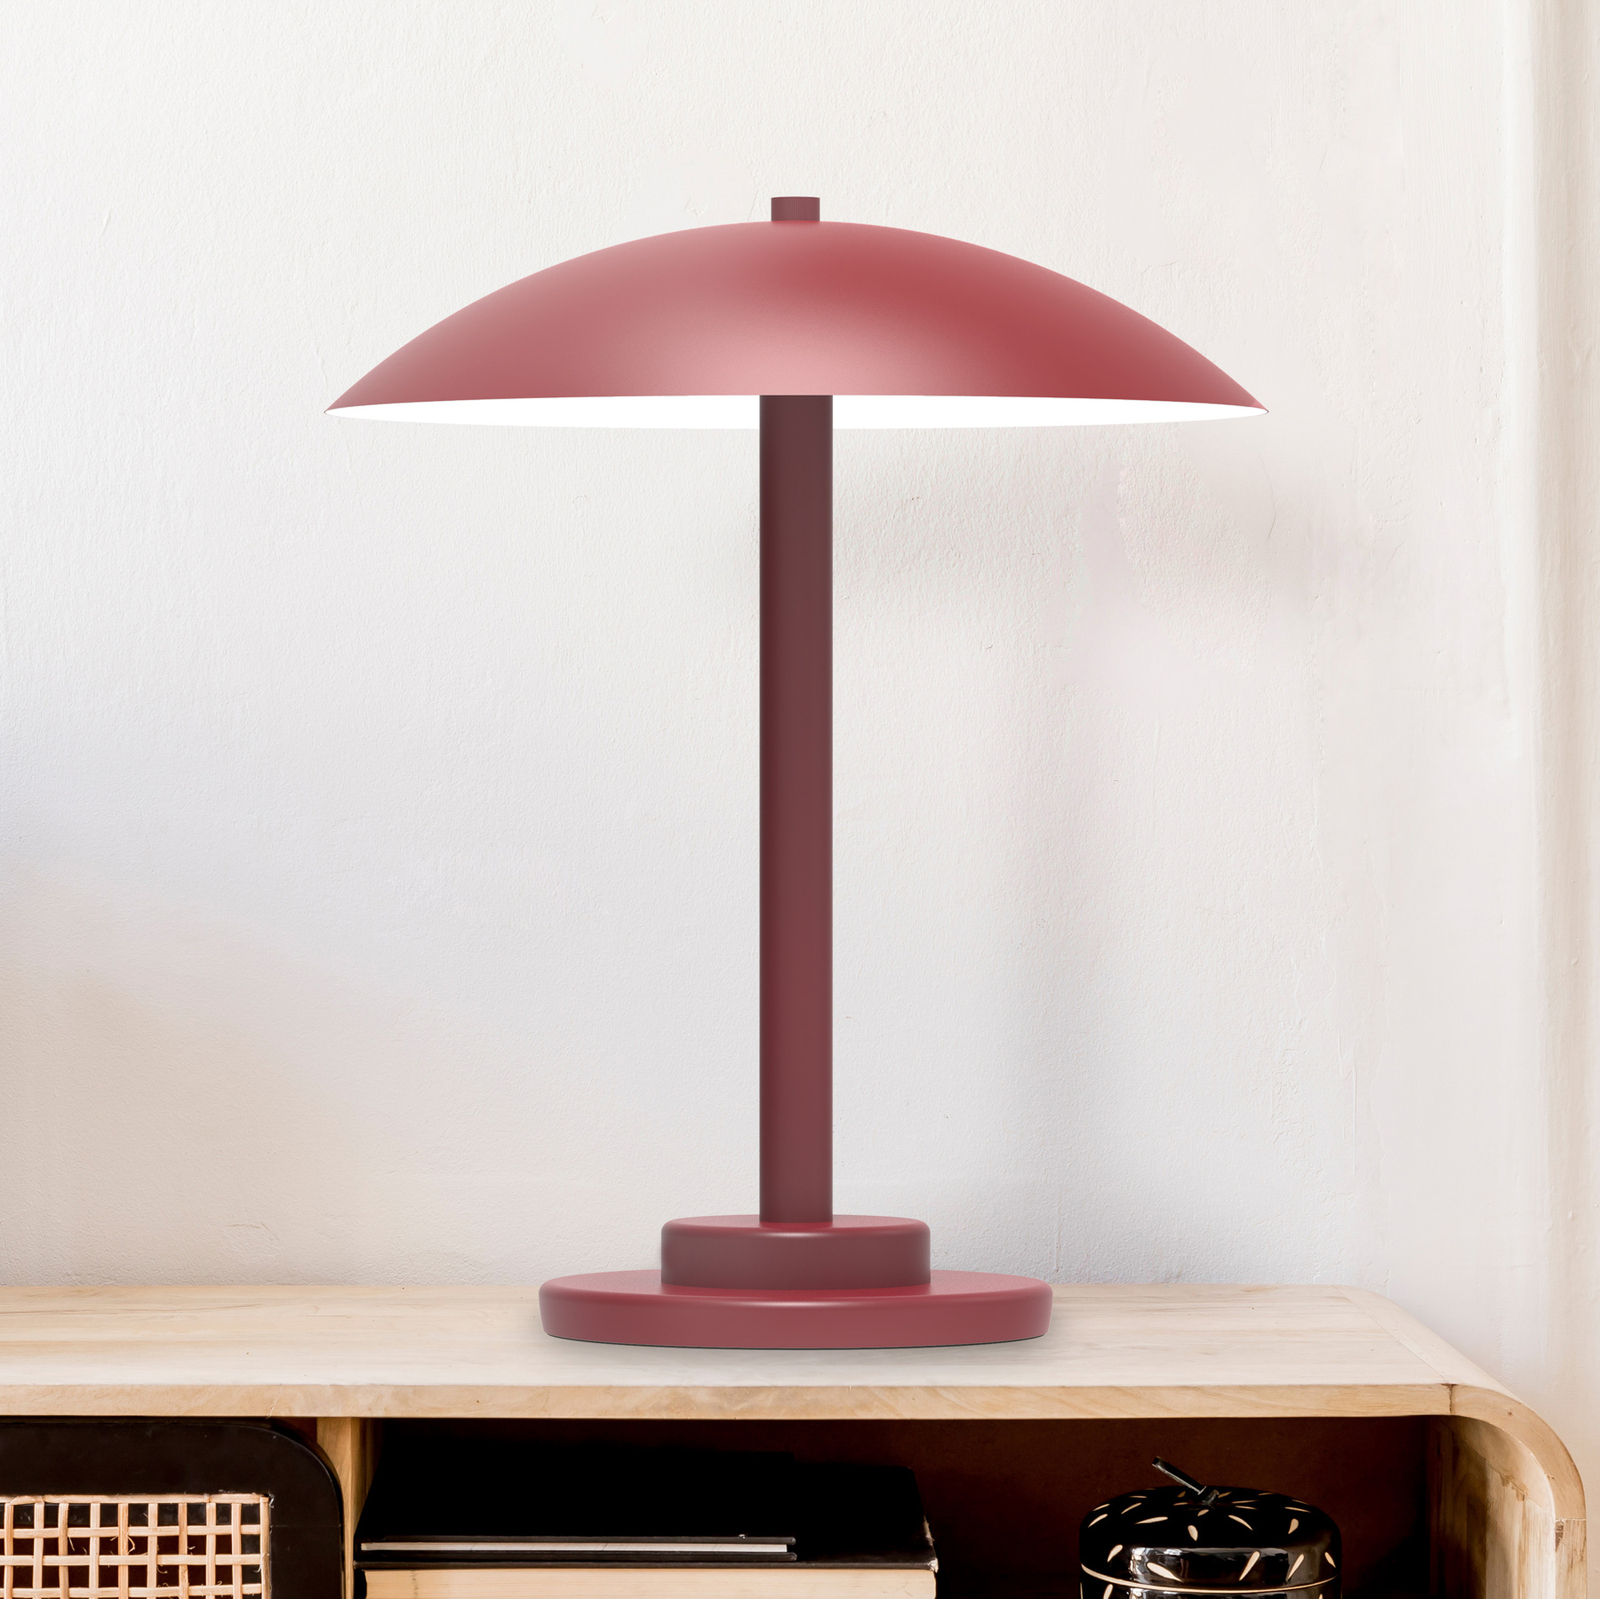 Aluminor Chicago table lamp, round lampshade, red